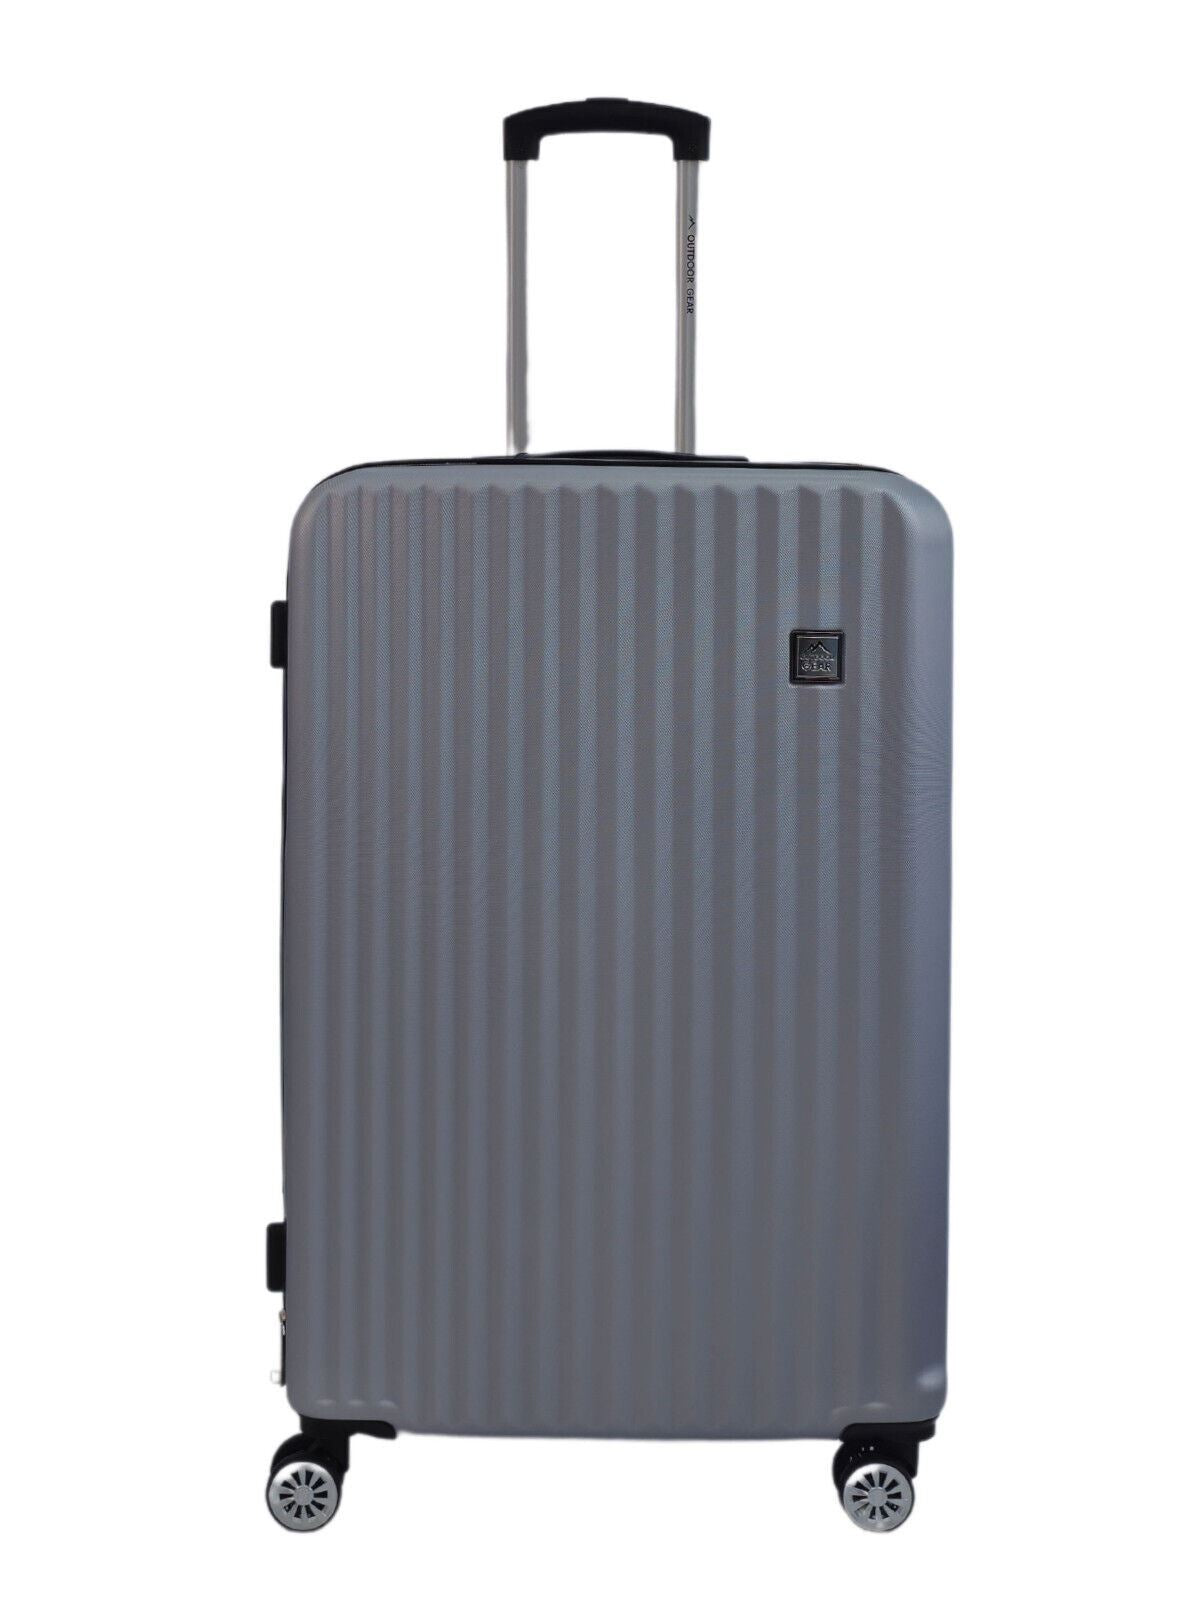 Albertville Large Hard Shell Suitcase in Silver